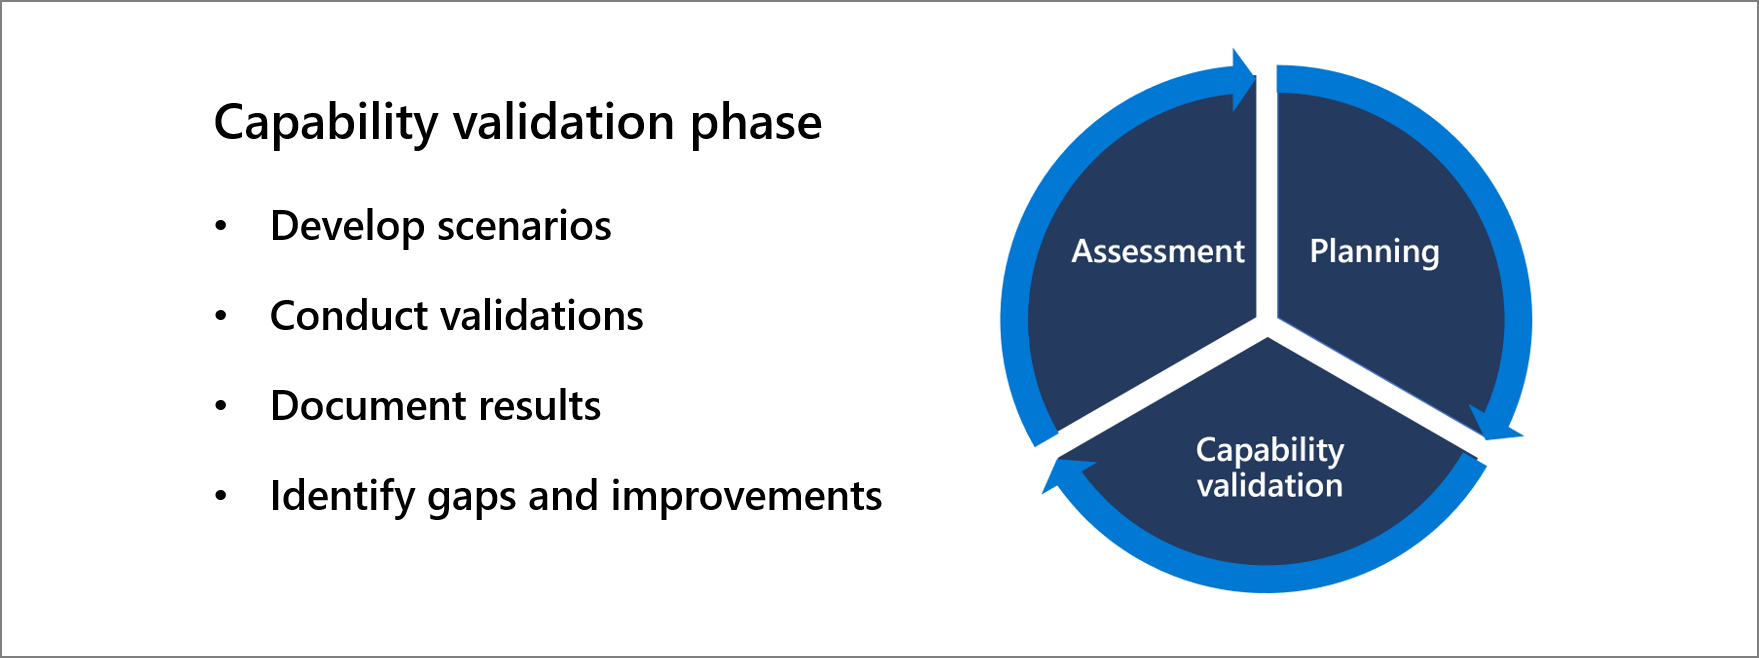 capability validation phase: - develop scenarios, - conduct validations, - document results, - identify gaps and improvements